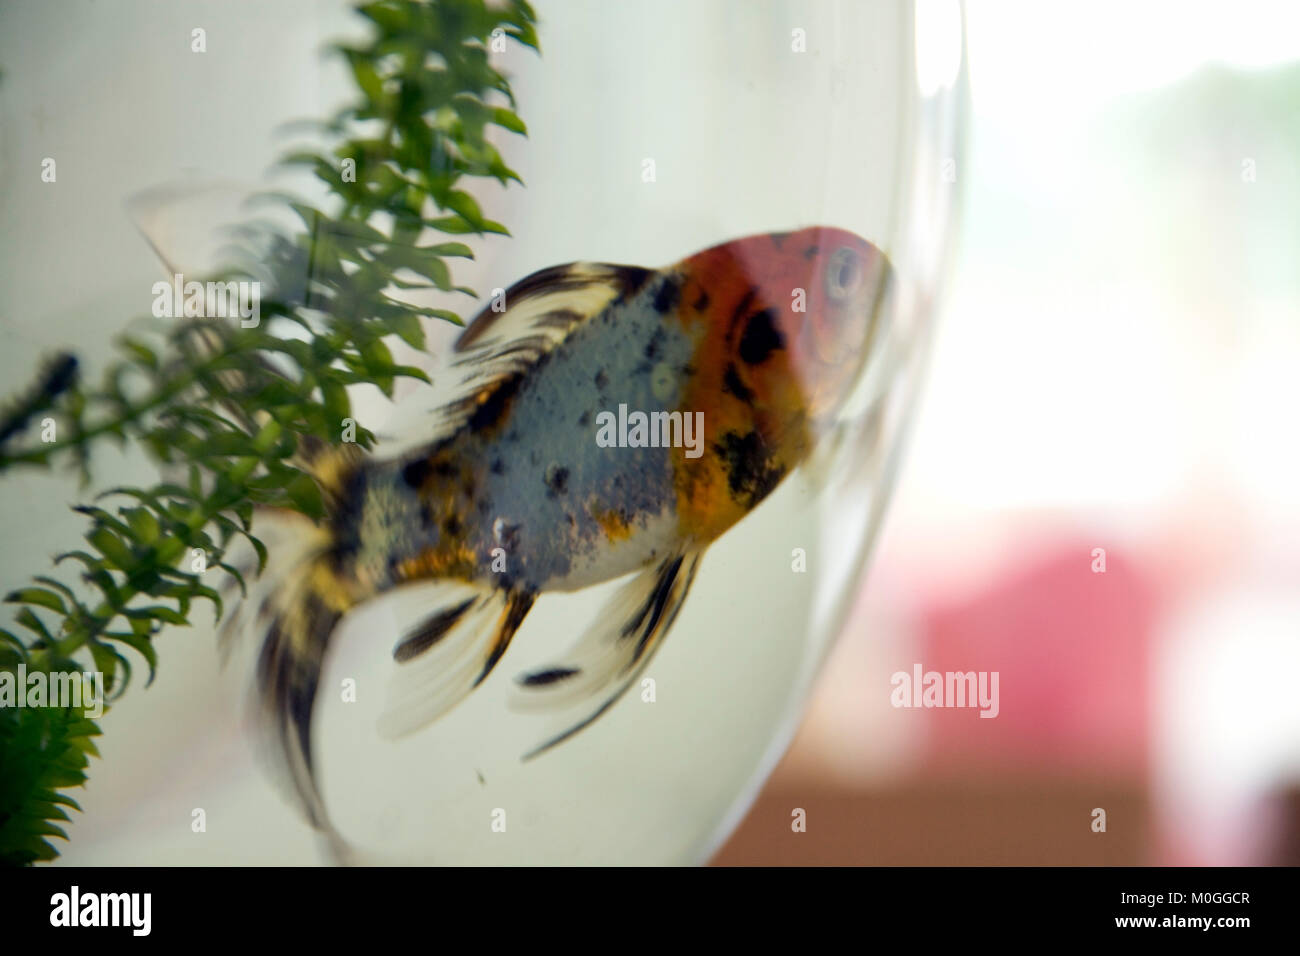 Pet goldfish in a large glass bowl Stock Photo